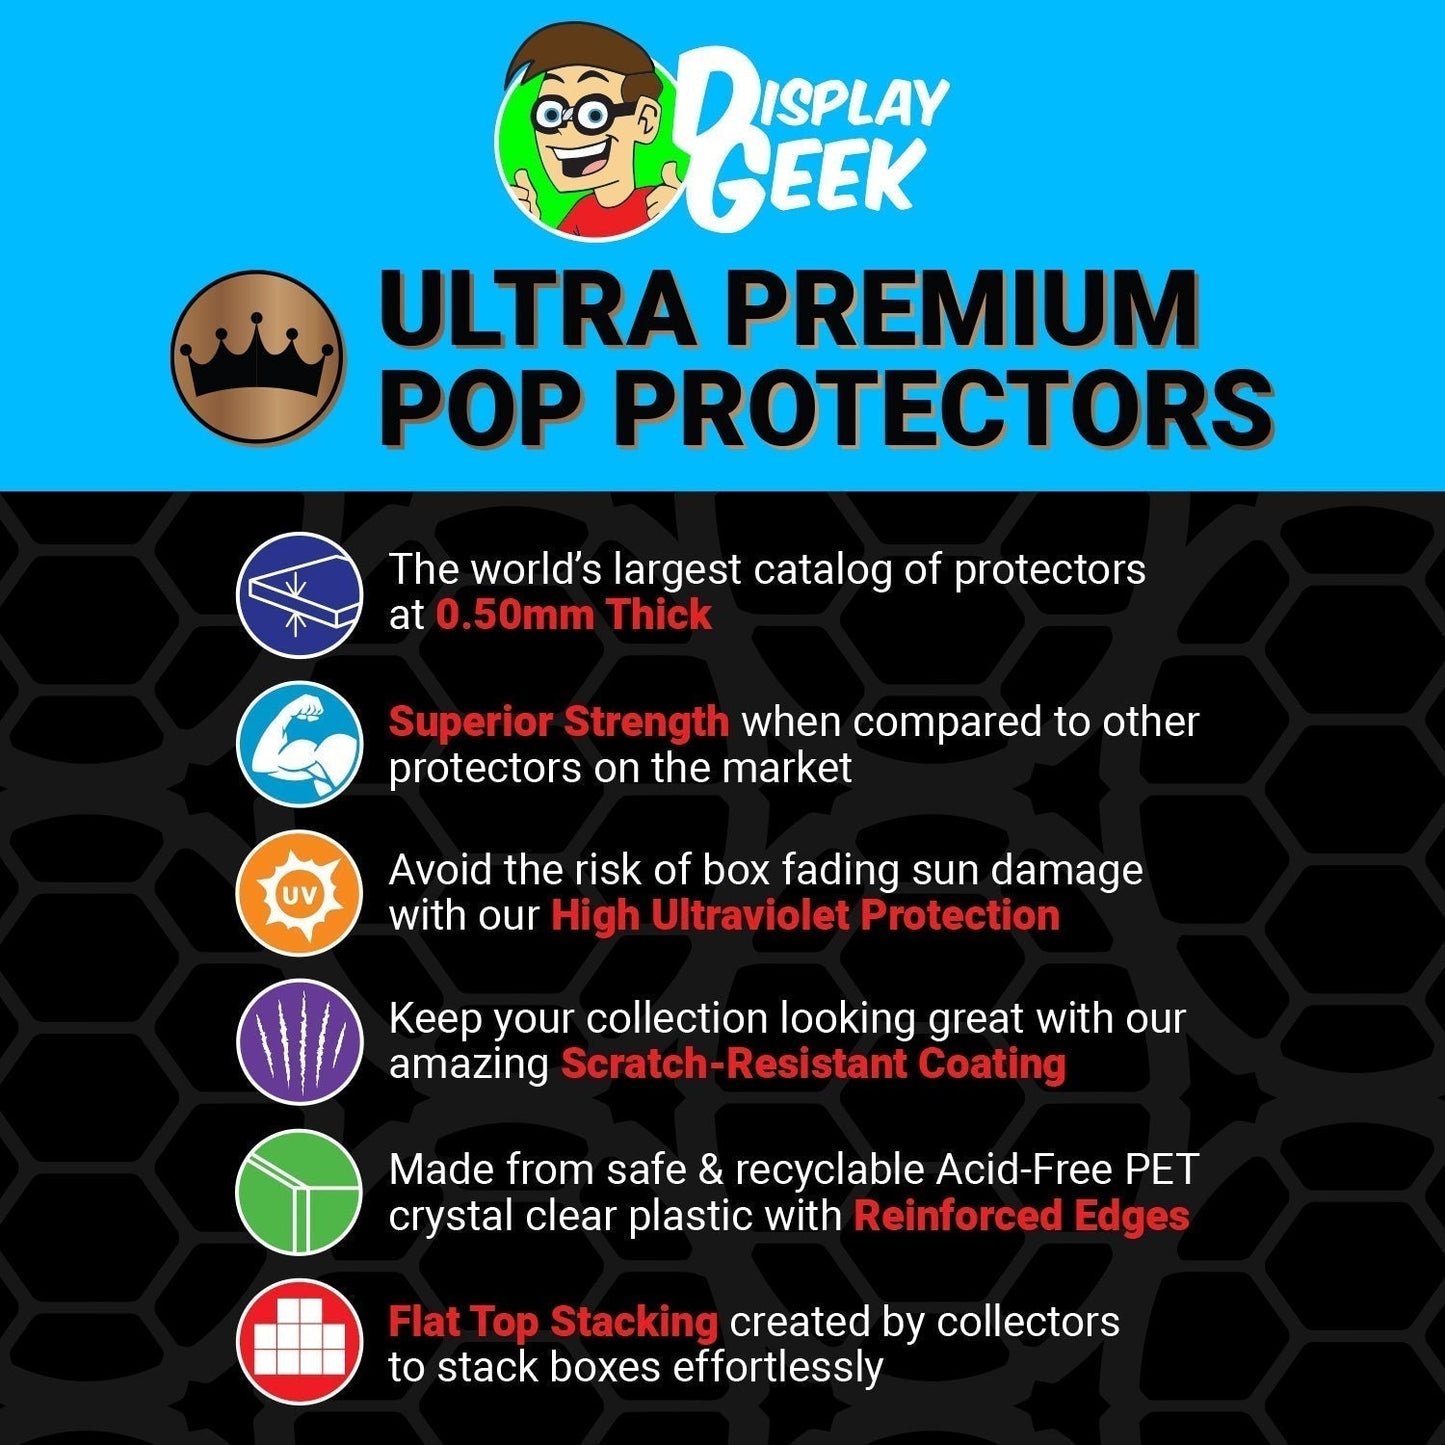 Pop Protector for Funkoverse Golden Girls Rose & Blanche 100 Funko 2 Pack - PPG Pop Protector Guide Search Created by Display Geek